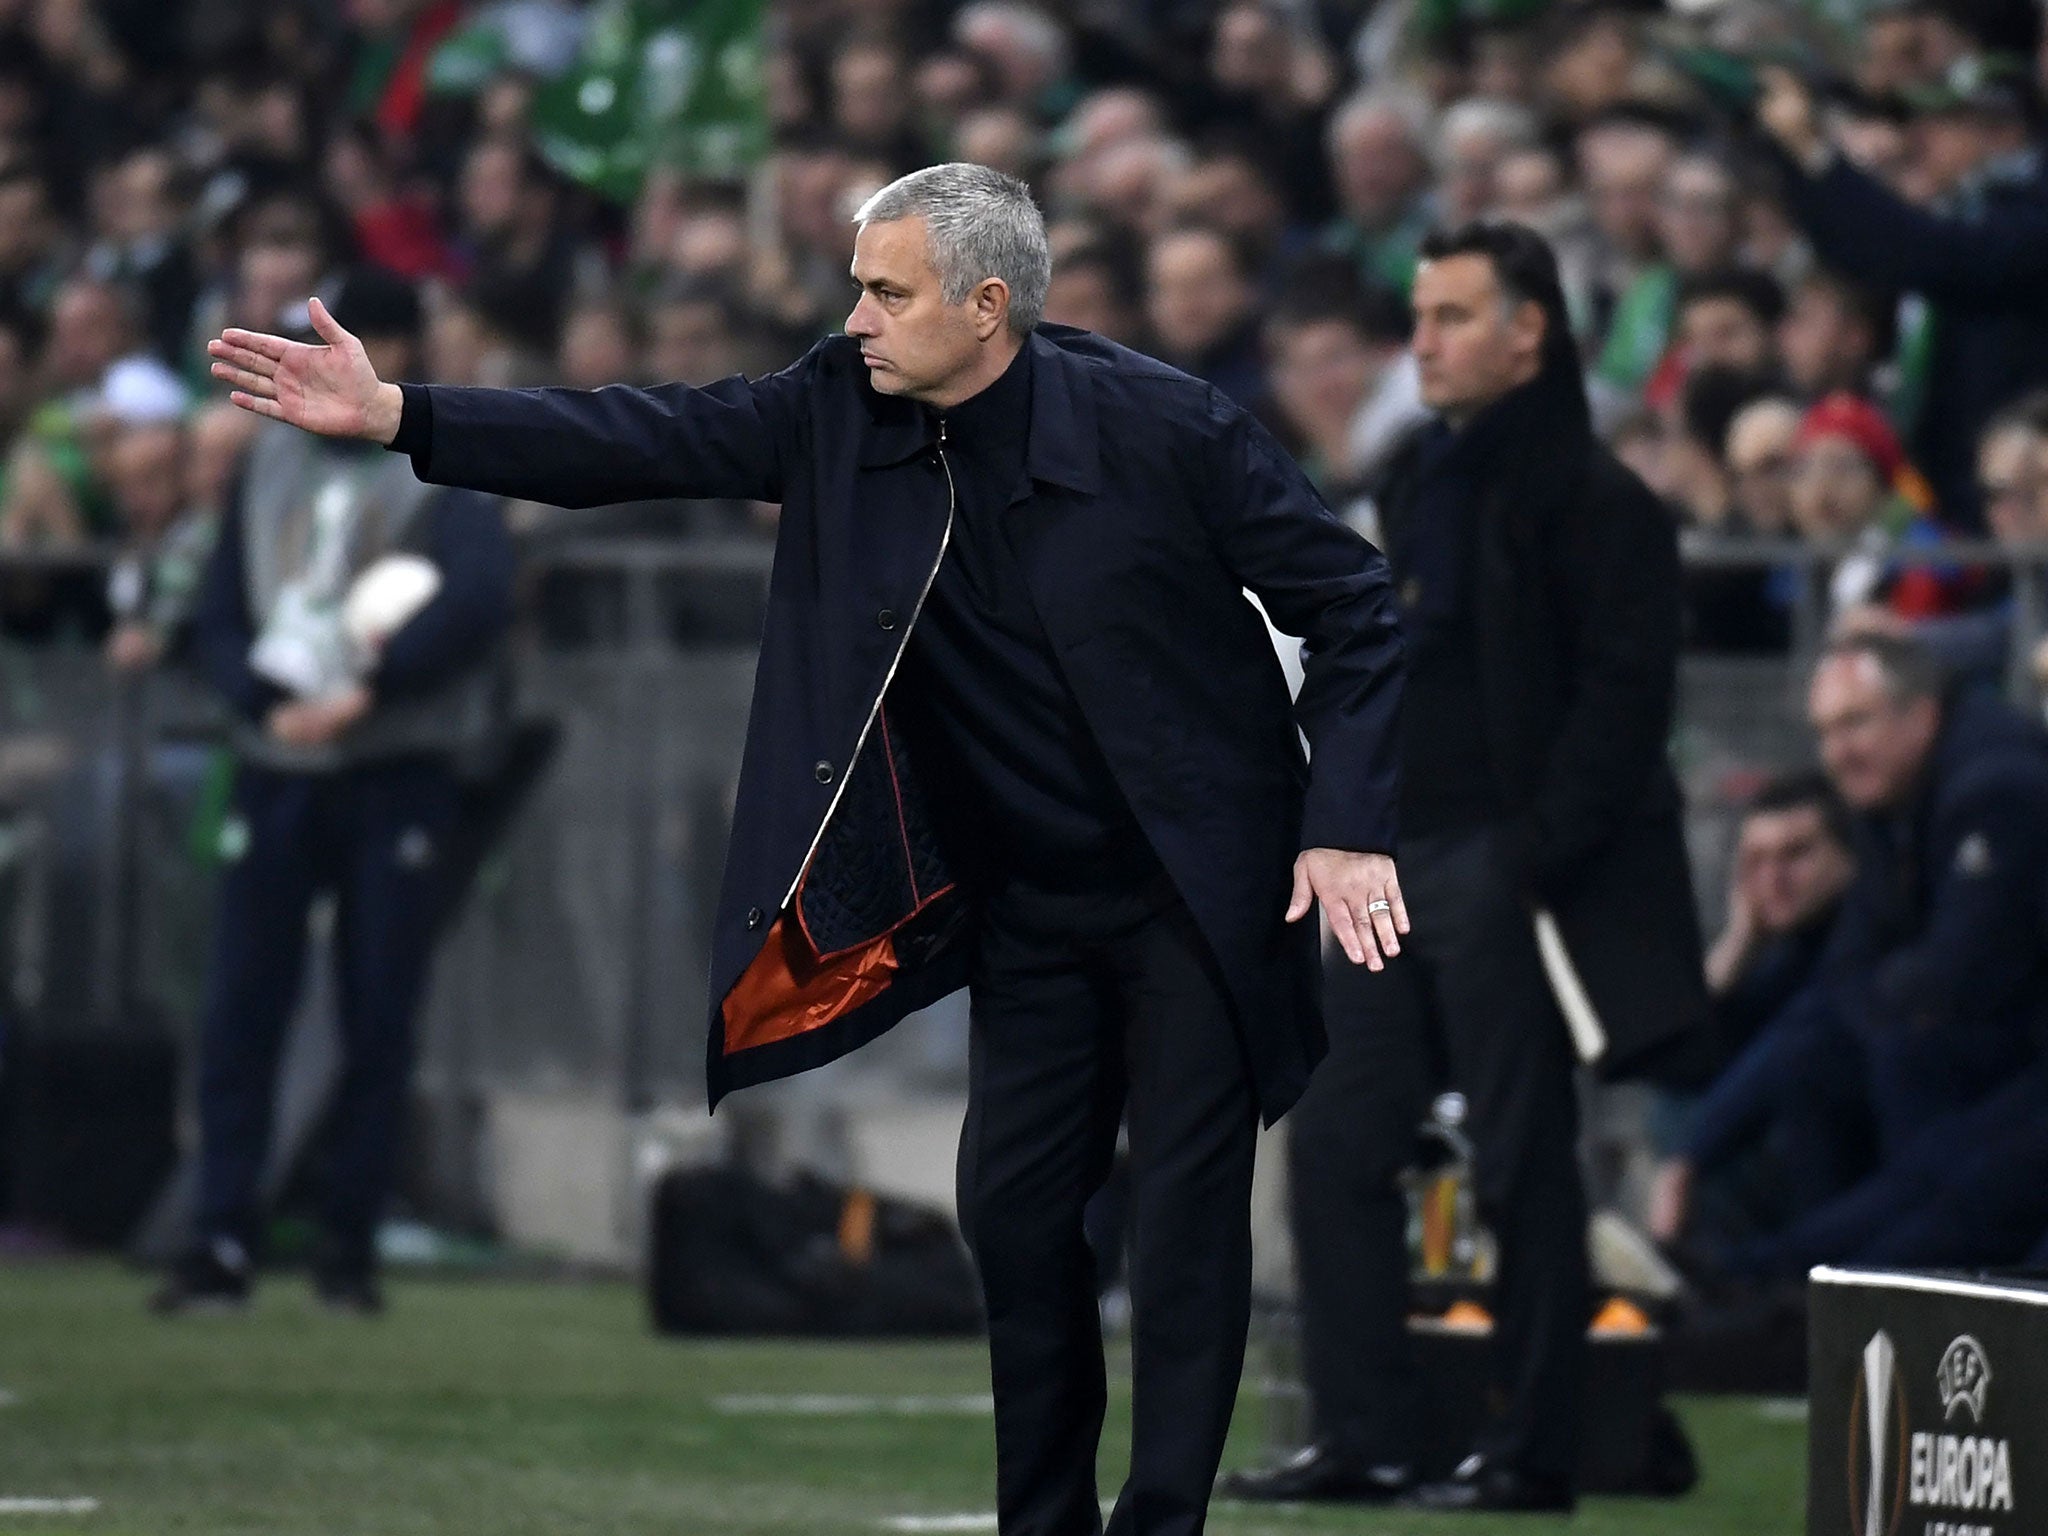 Jose Mourinho issues instructions from the sideline during United's 1-0 victory over Saint-Etienne